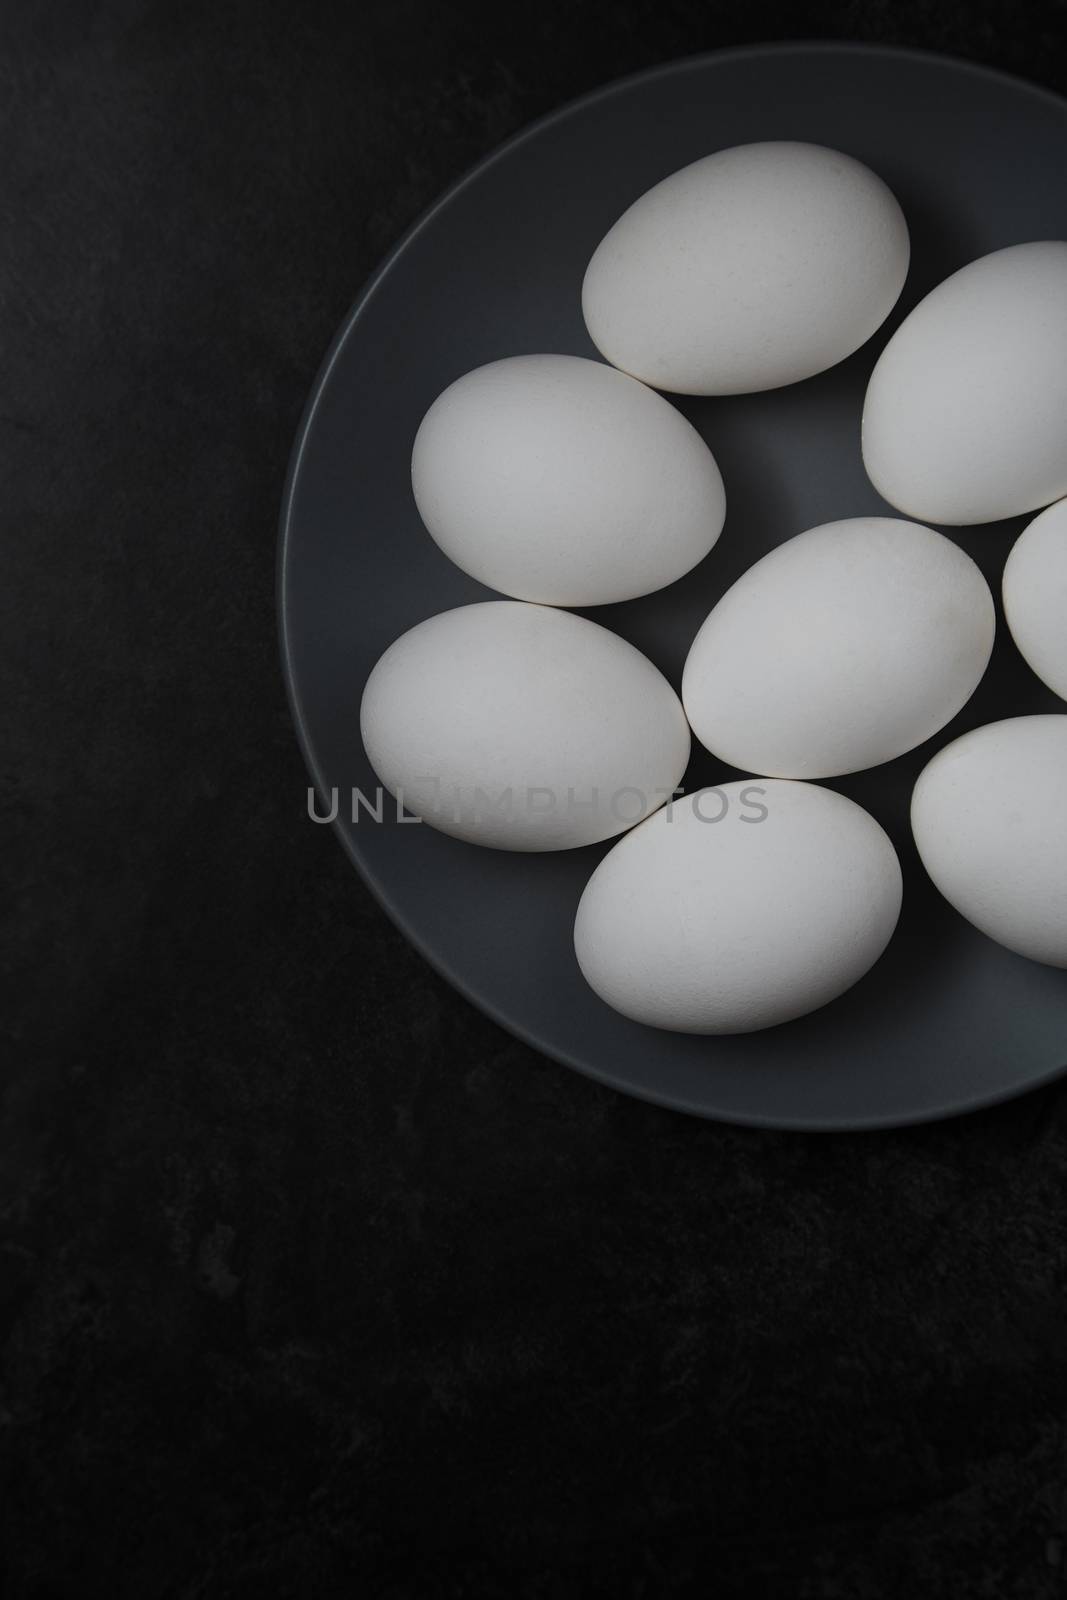 Chicken eggs on a plate by Novic